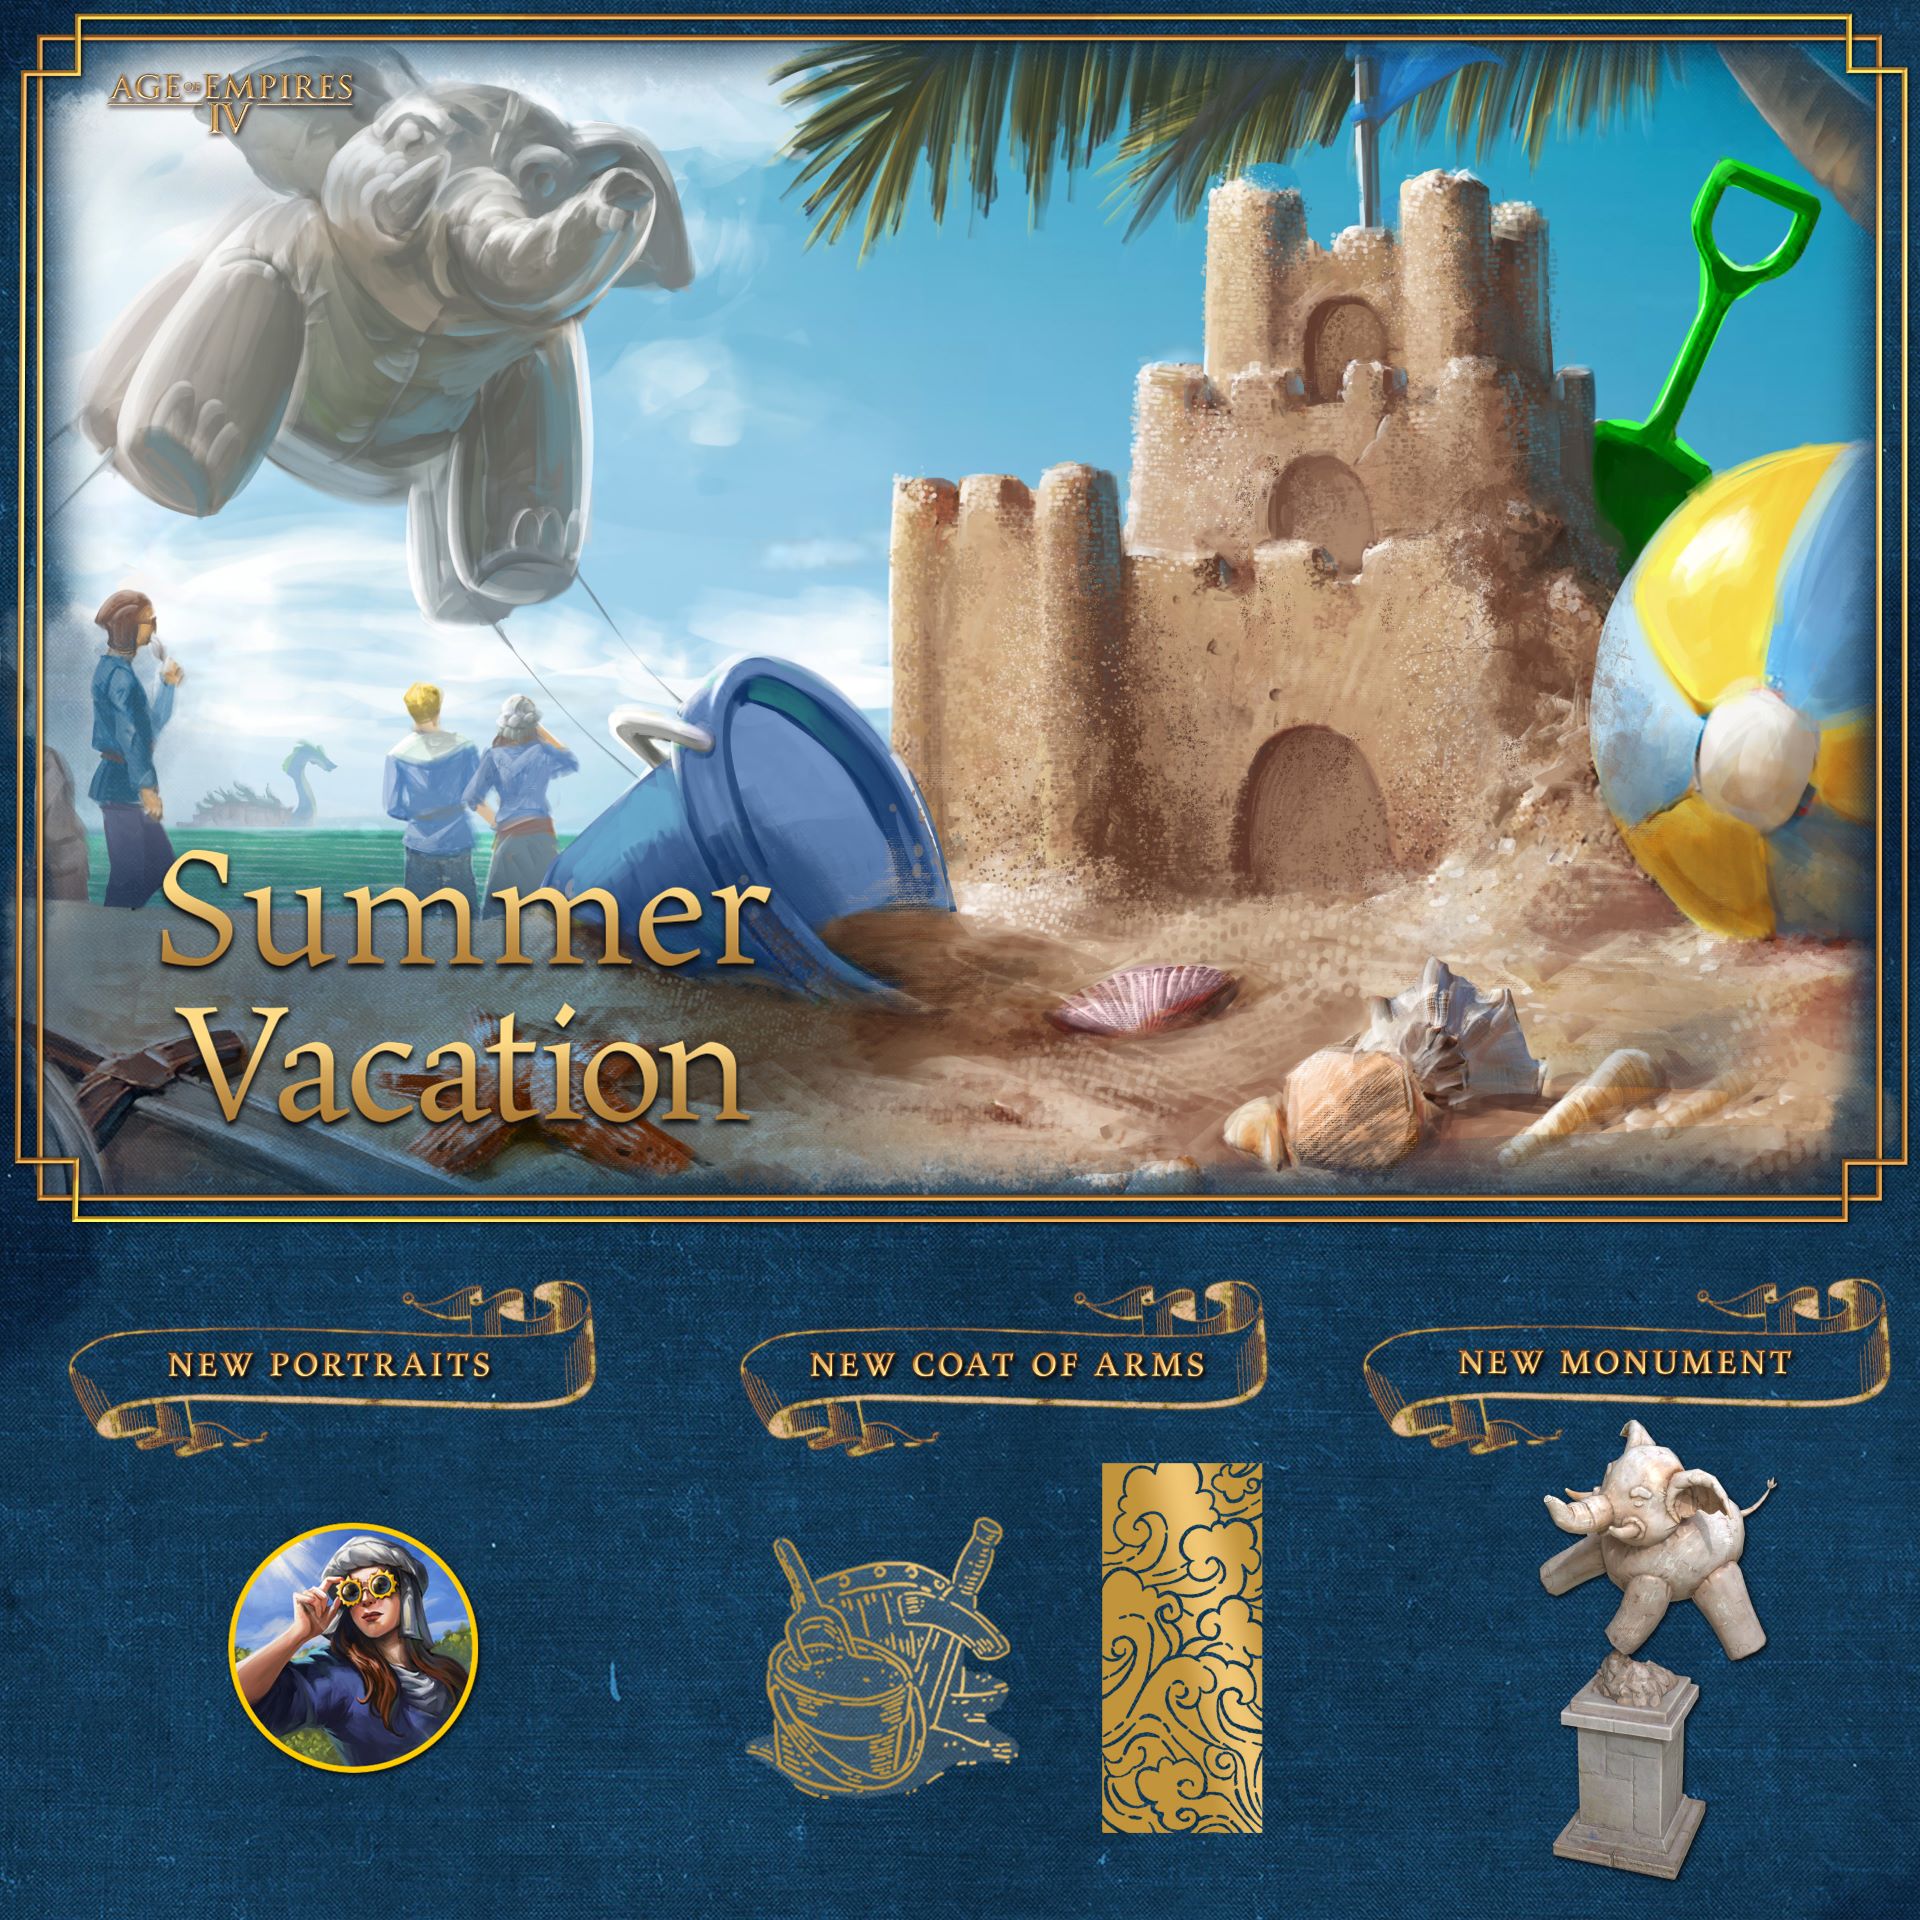 Sand castle on the beach with rewards for the summer vacation event at the bottom.